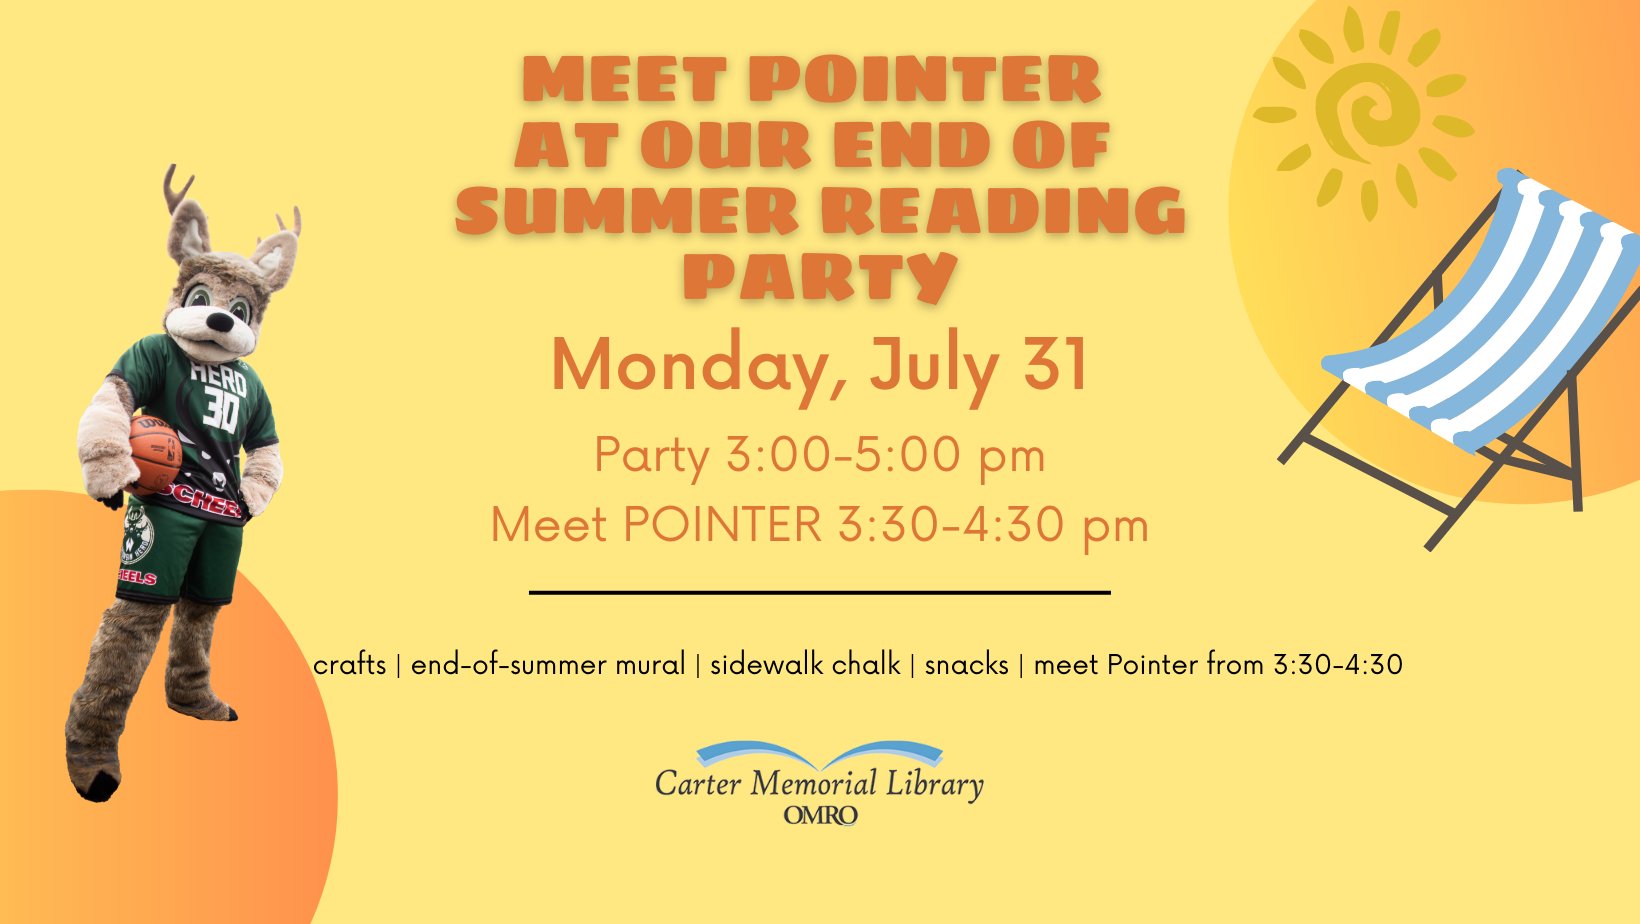 Meet POINTER of the Wisconsin Herd at our End of Summer Reading Party!